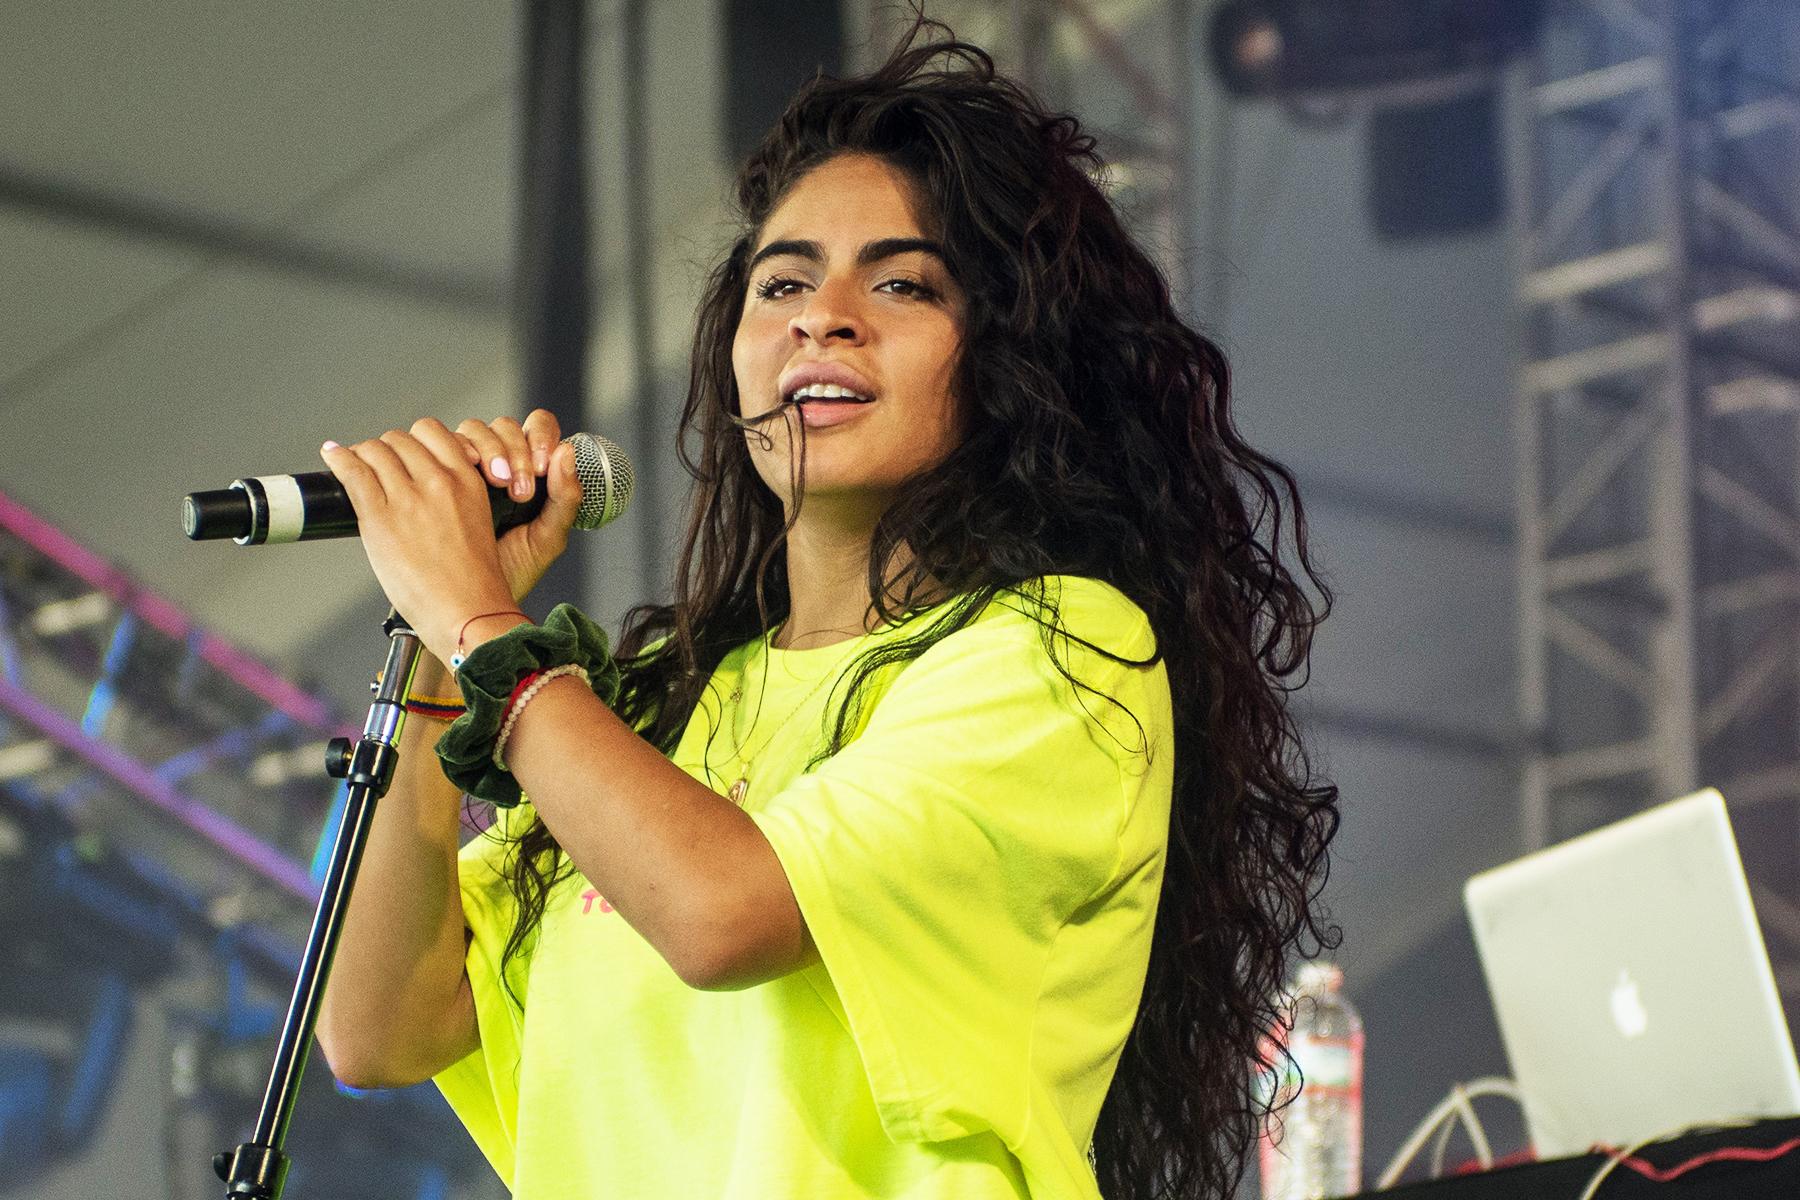 51 Hot Pictures Of Jessie Reyez Will Leave You Flabbergasted By Her Hot Magnificence 3